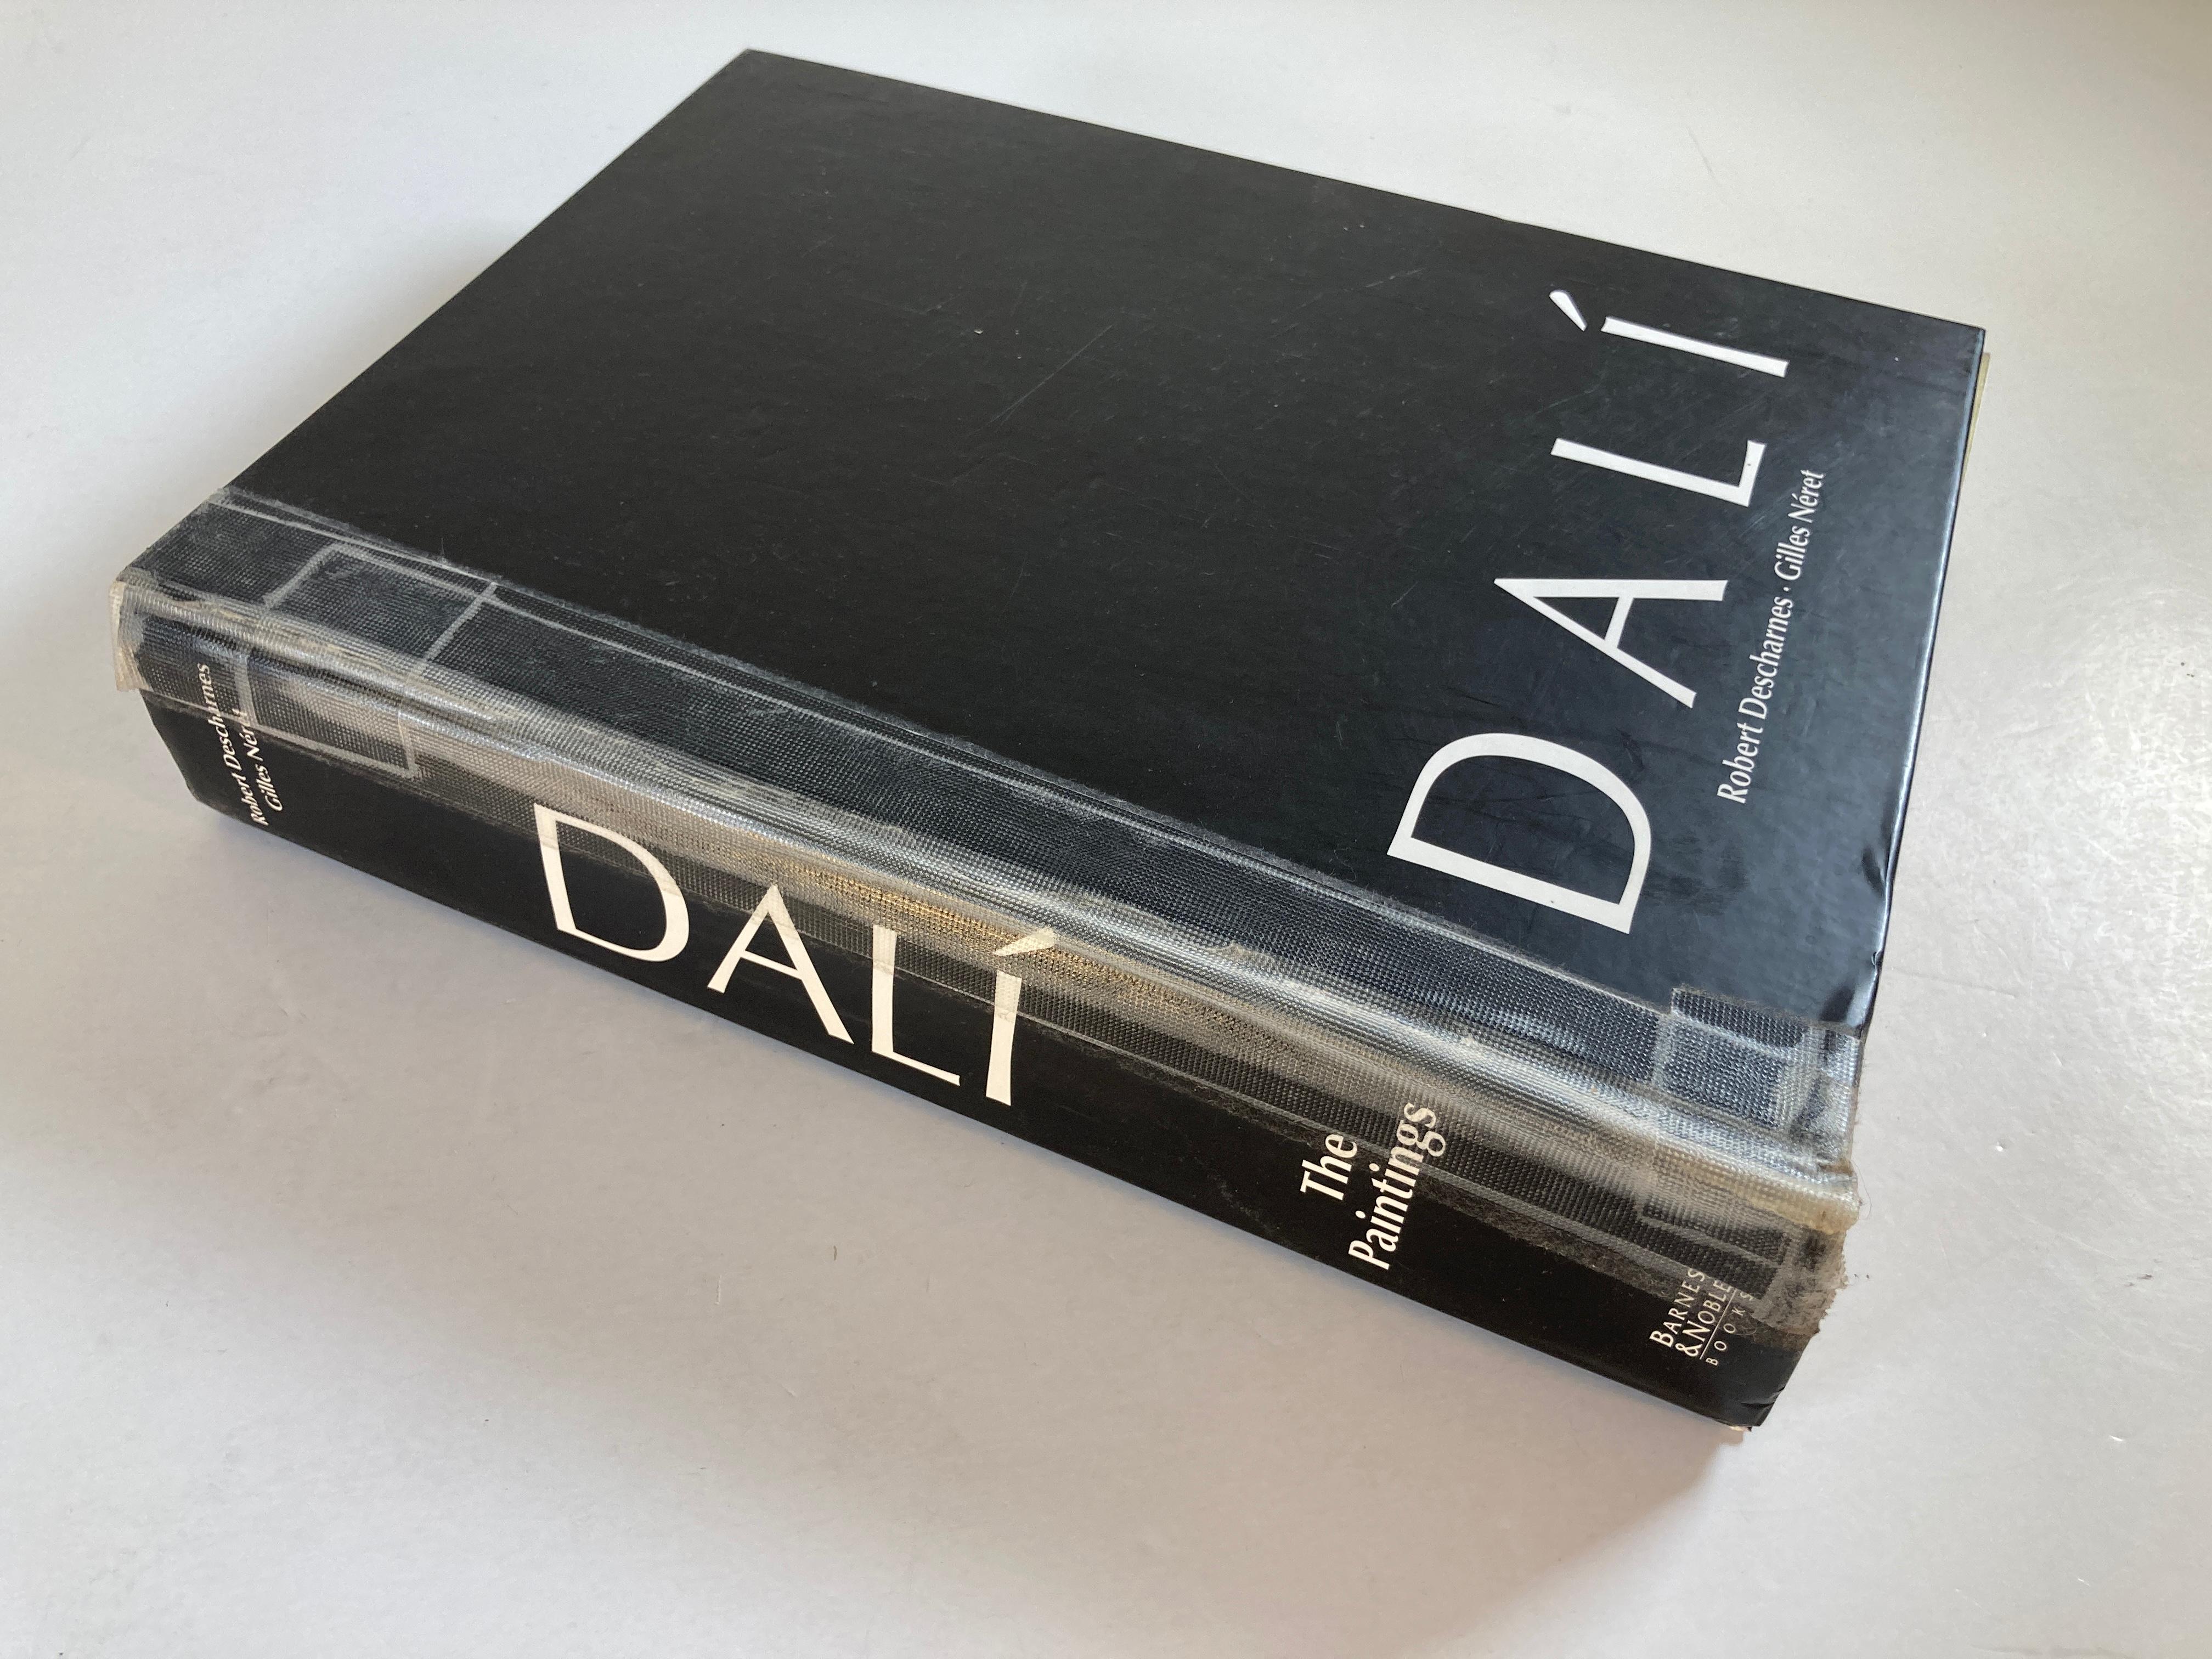 Dali The Work and the Man by Robert Descharnes Hardcover Coffee Table Art Book For Sale 5